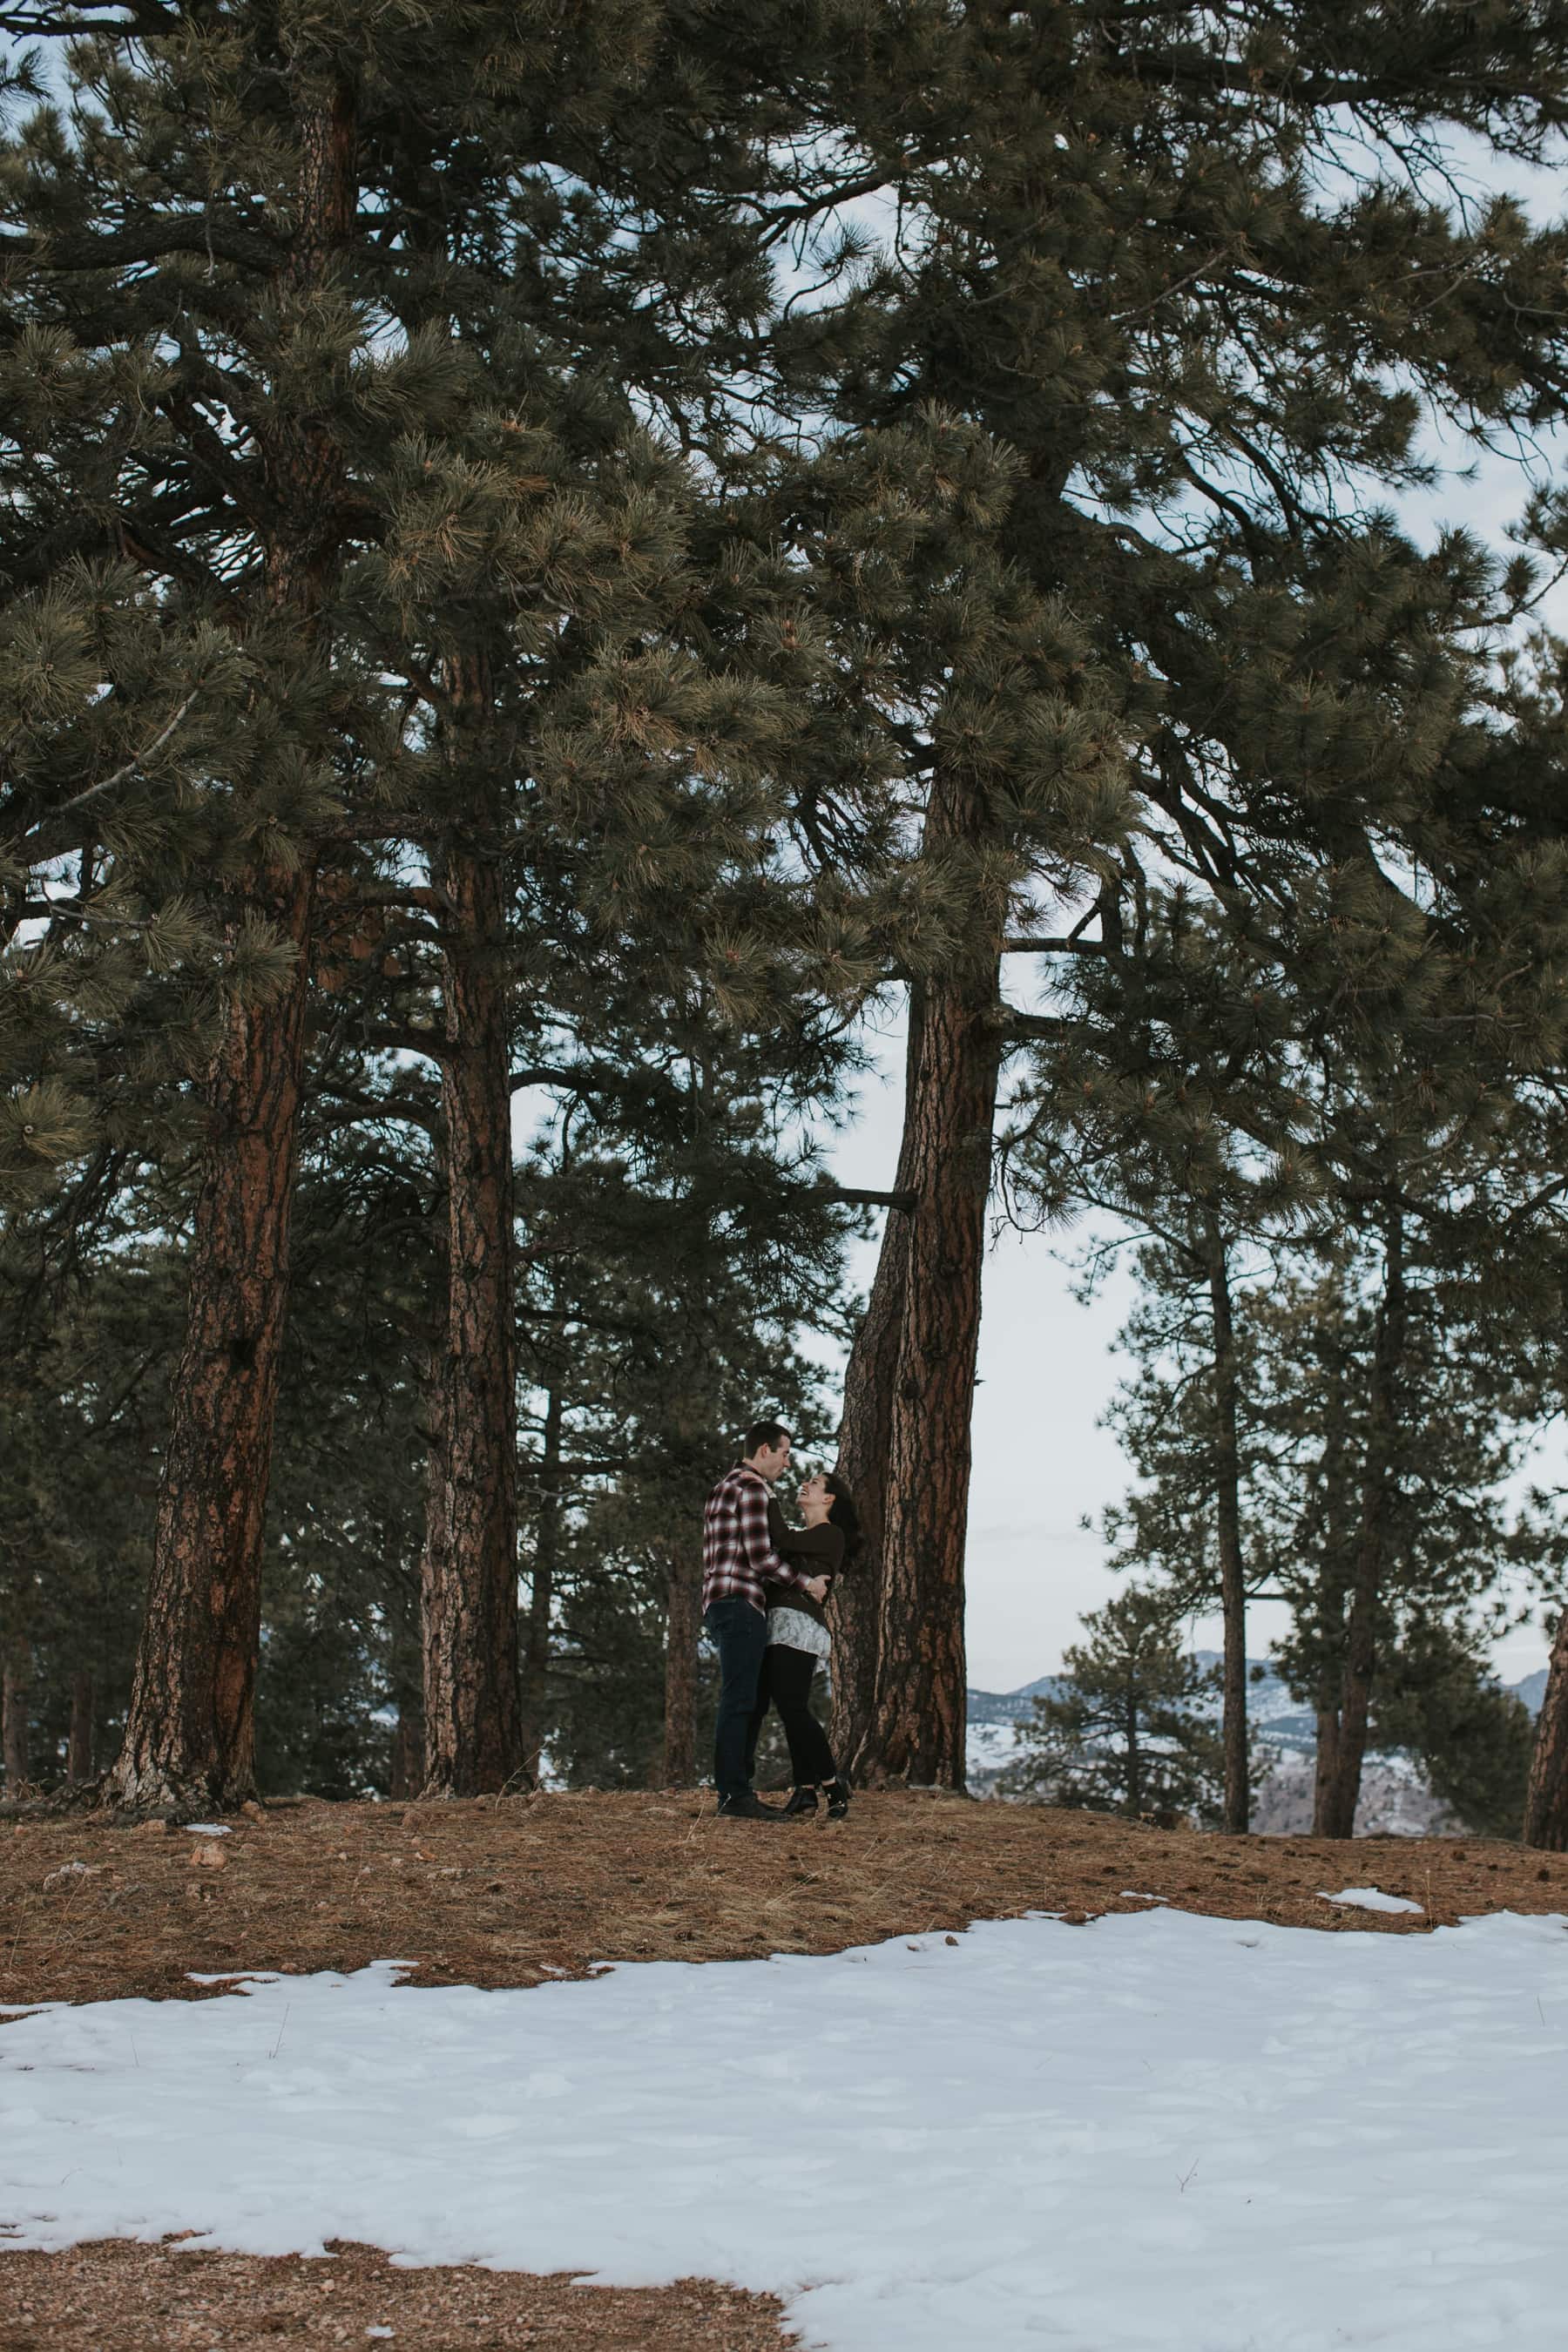  candid engagement photos, diamond engagement ring, engageed engineers, golden engagement photographer, golden engagement photography, golden winter engagement, laughter during engagement session, lookout mountain engagement, round engagement ring, texans in colorado, winter engagement